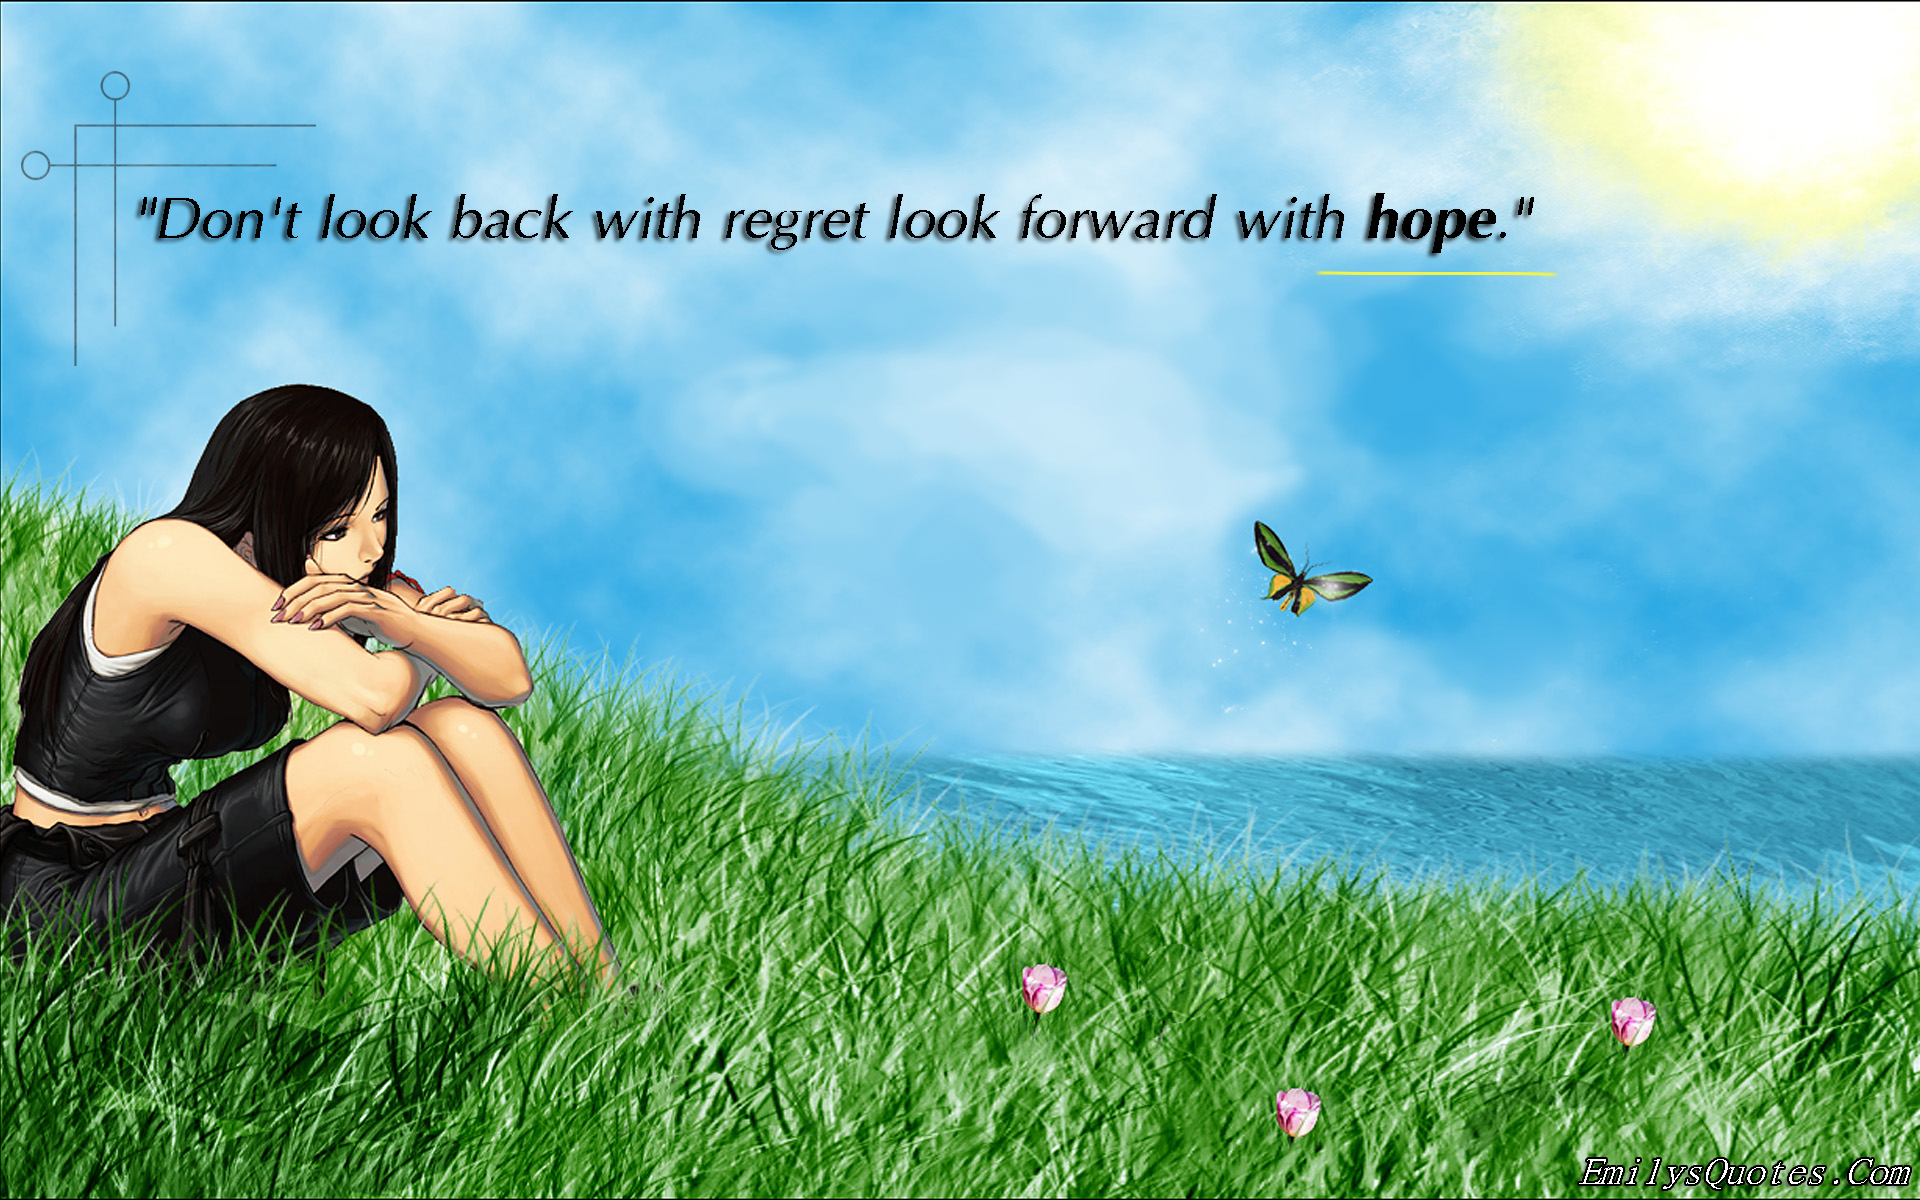 Don’t look back with regret look forward with hope